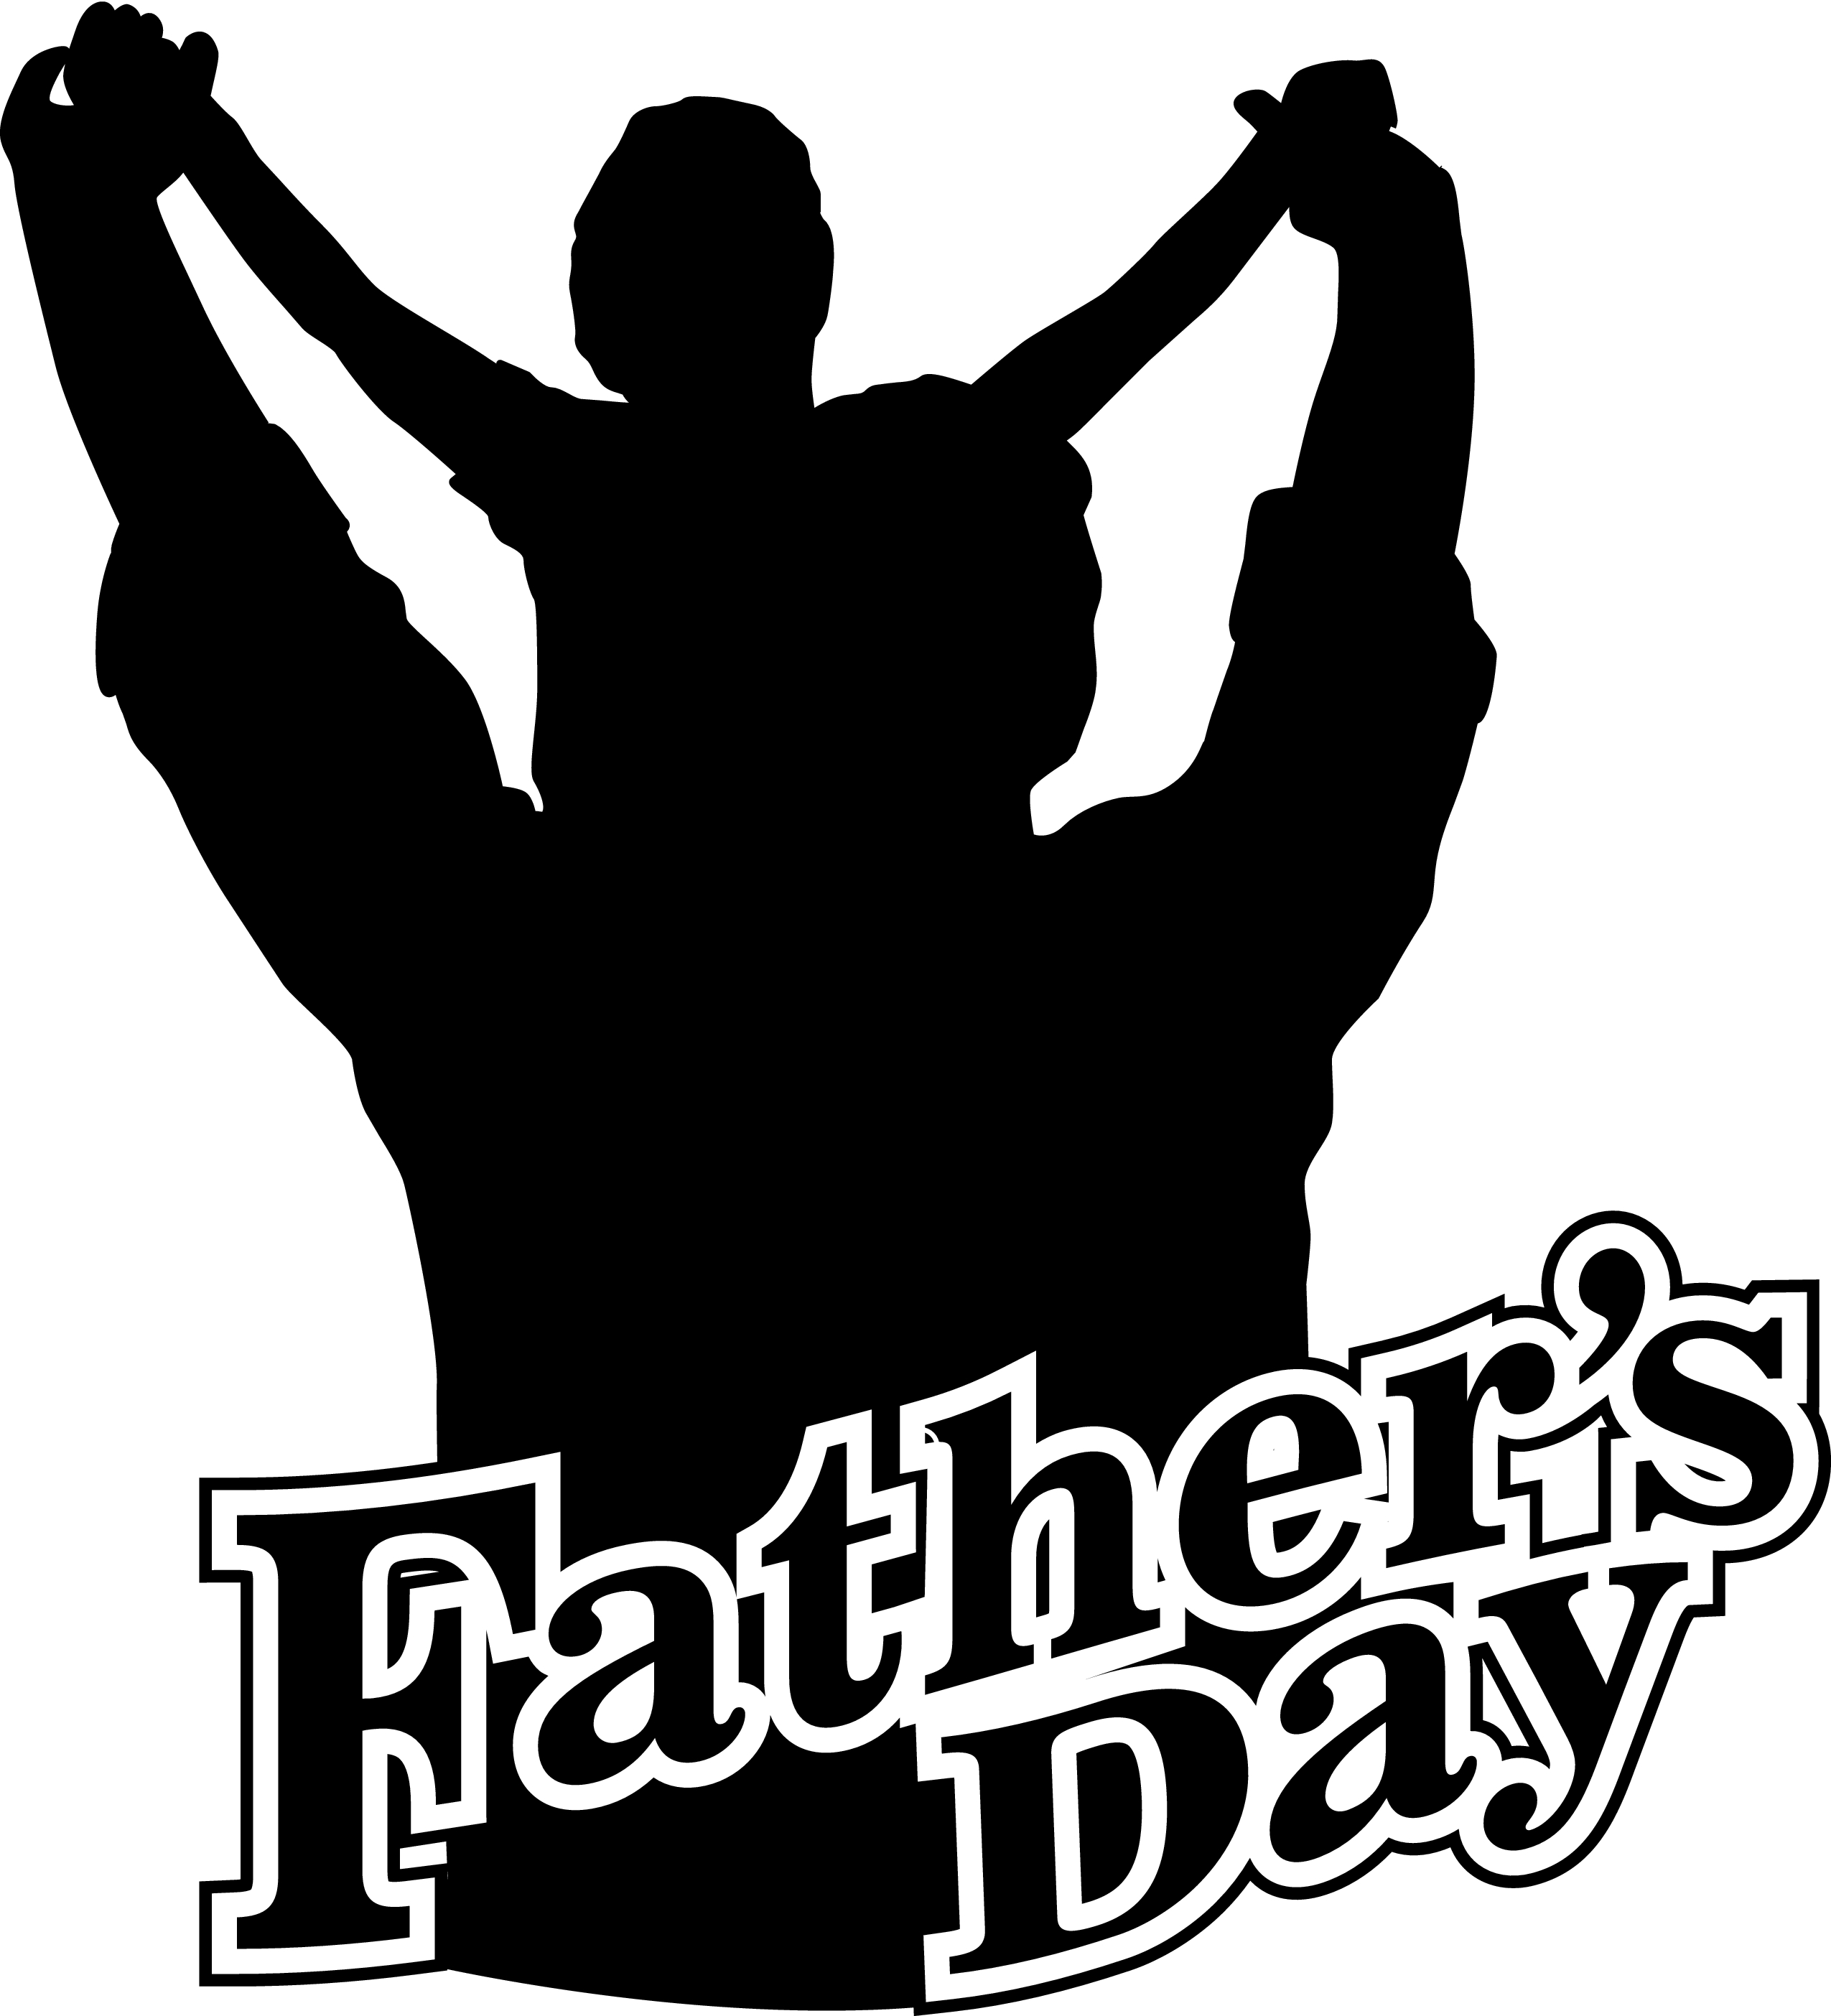 Fathers Day Clipart - ClipArt Best